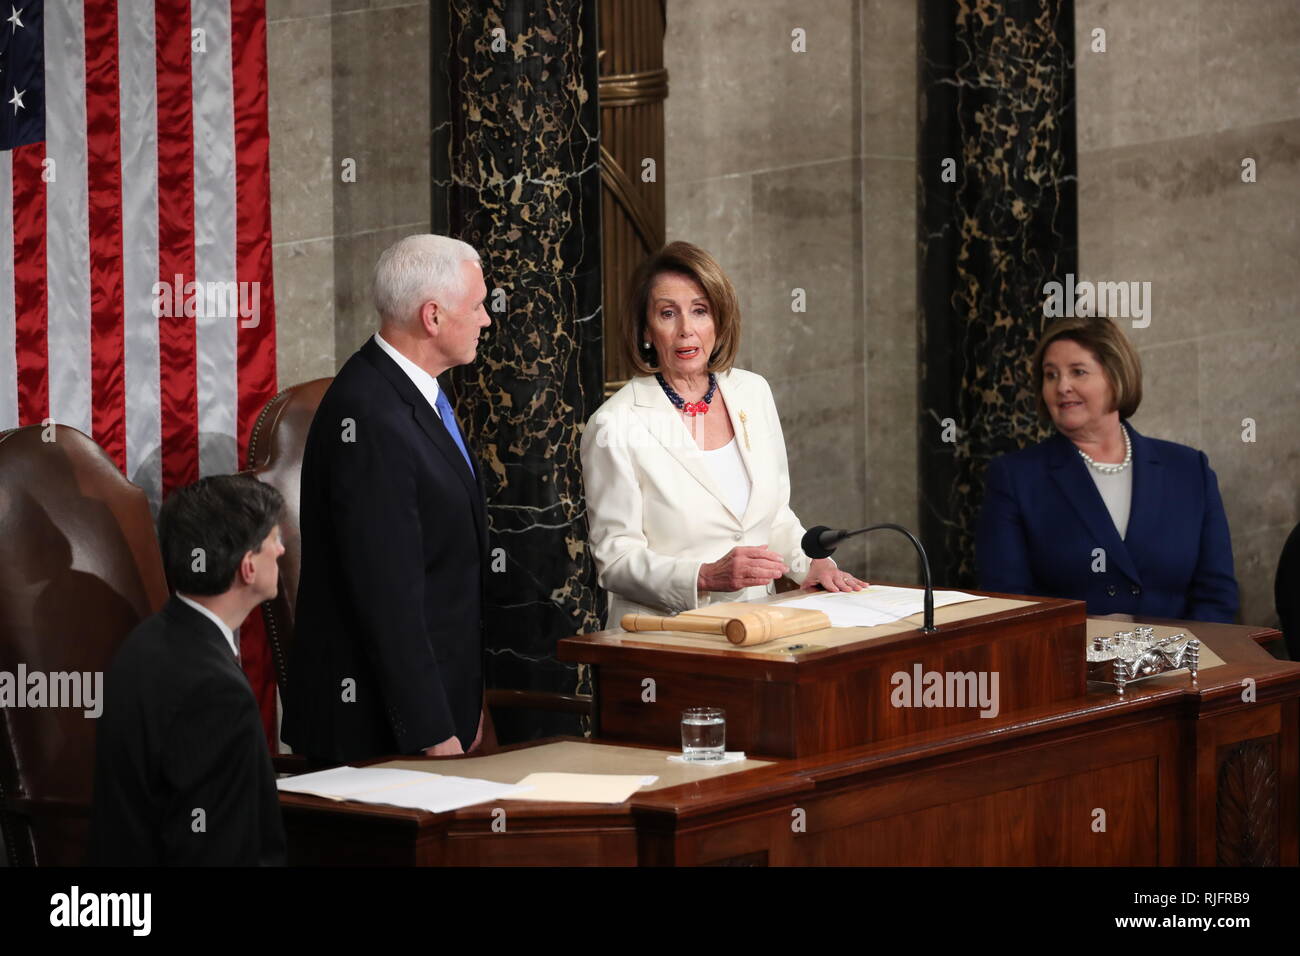 Washington, United States Of America. 05th Feb, 2019. United States Vice President Mike Pence, left, and Speaker of the US House of Representatives Nancy Pelosi (Democrat of California) prior to US President Donald J. Trump delivering his second annual State of the Union Address to a joint session of the US Congress in the US Capitol in Washington, DC on Tuesday, February 5, 2019. Credit: Alex Edelman/CNP | usage worldwide Credit: dpa/Alamy Live News Stock Photo